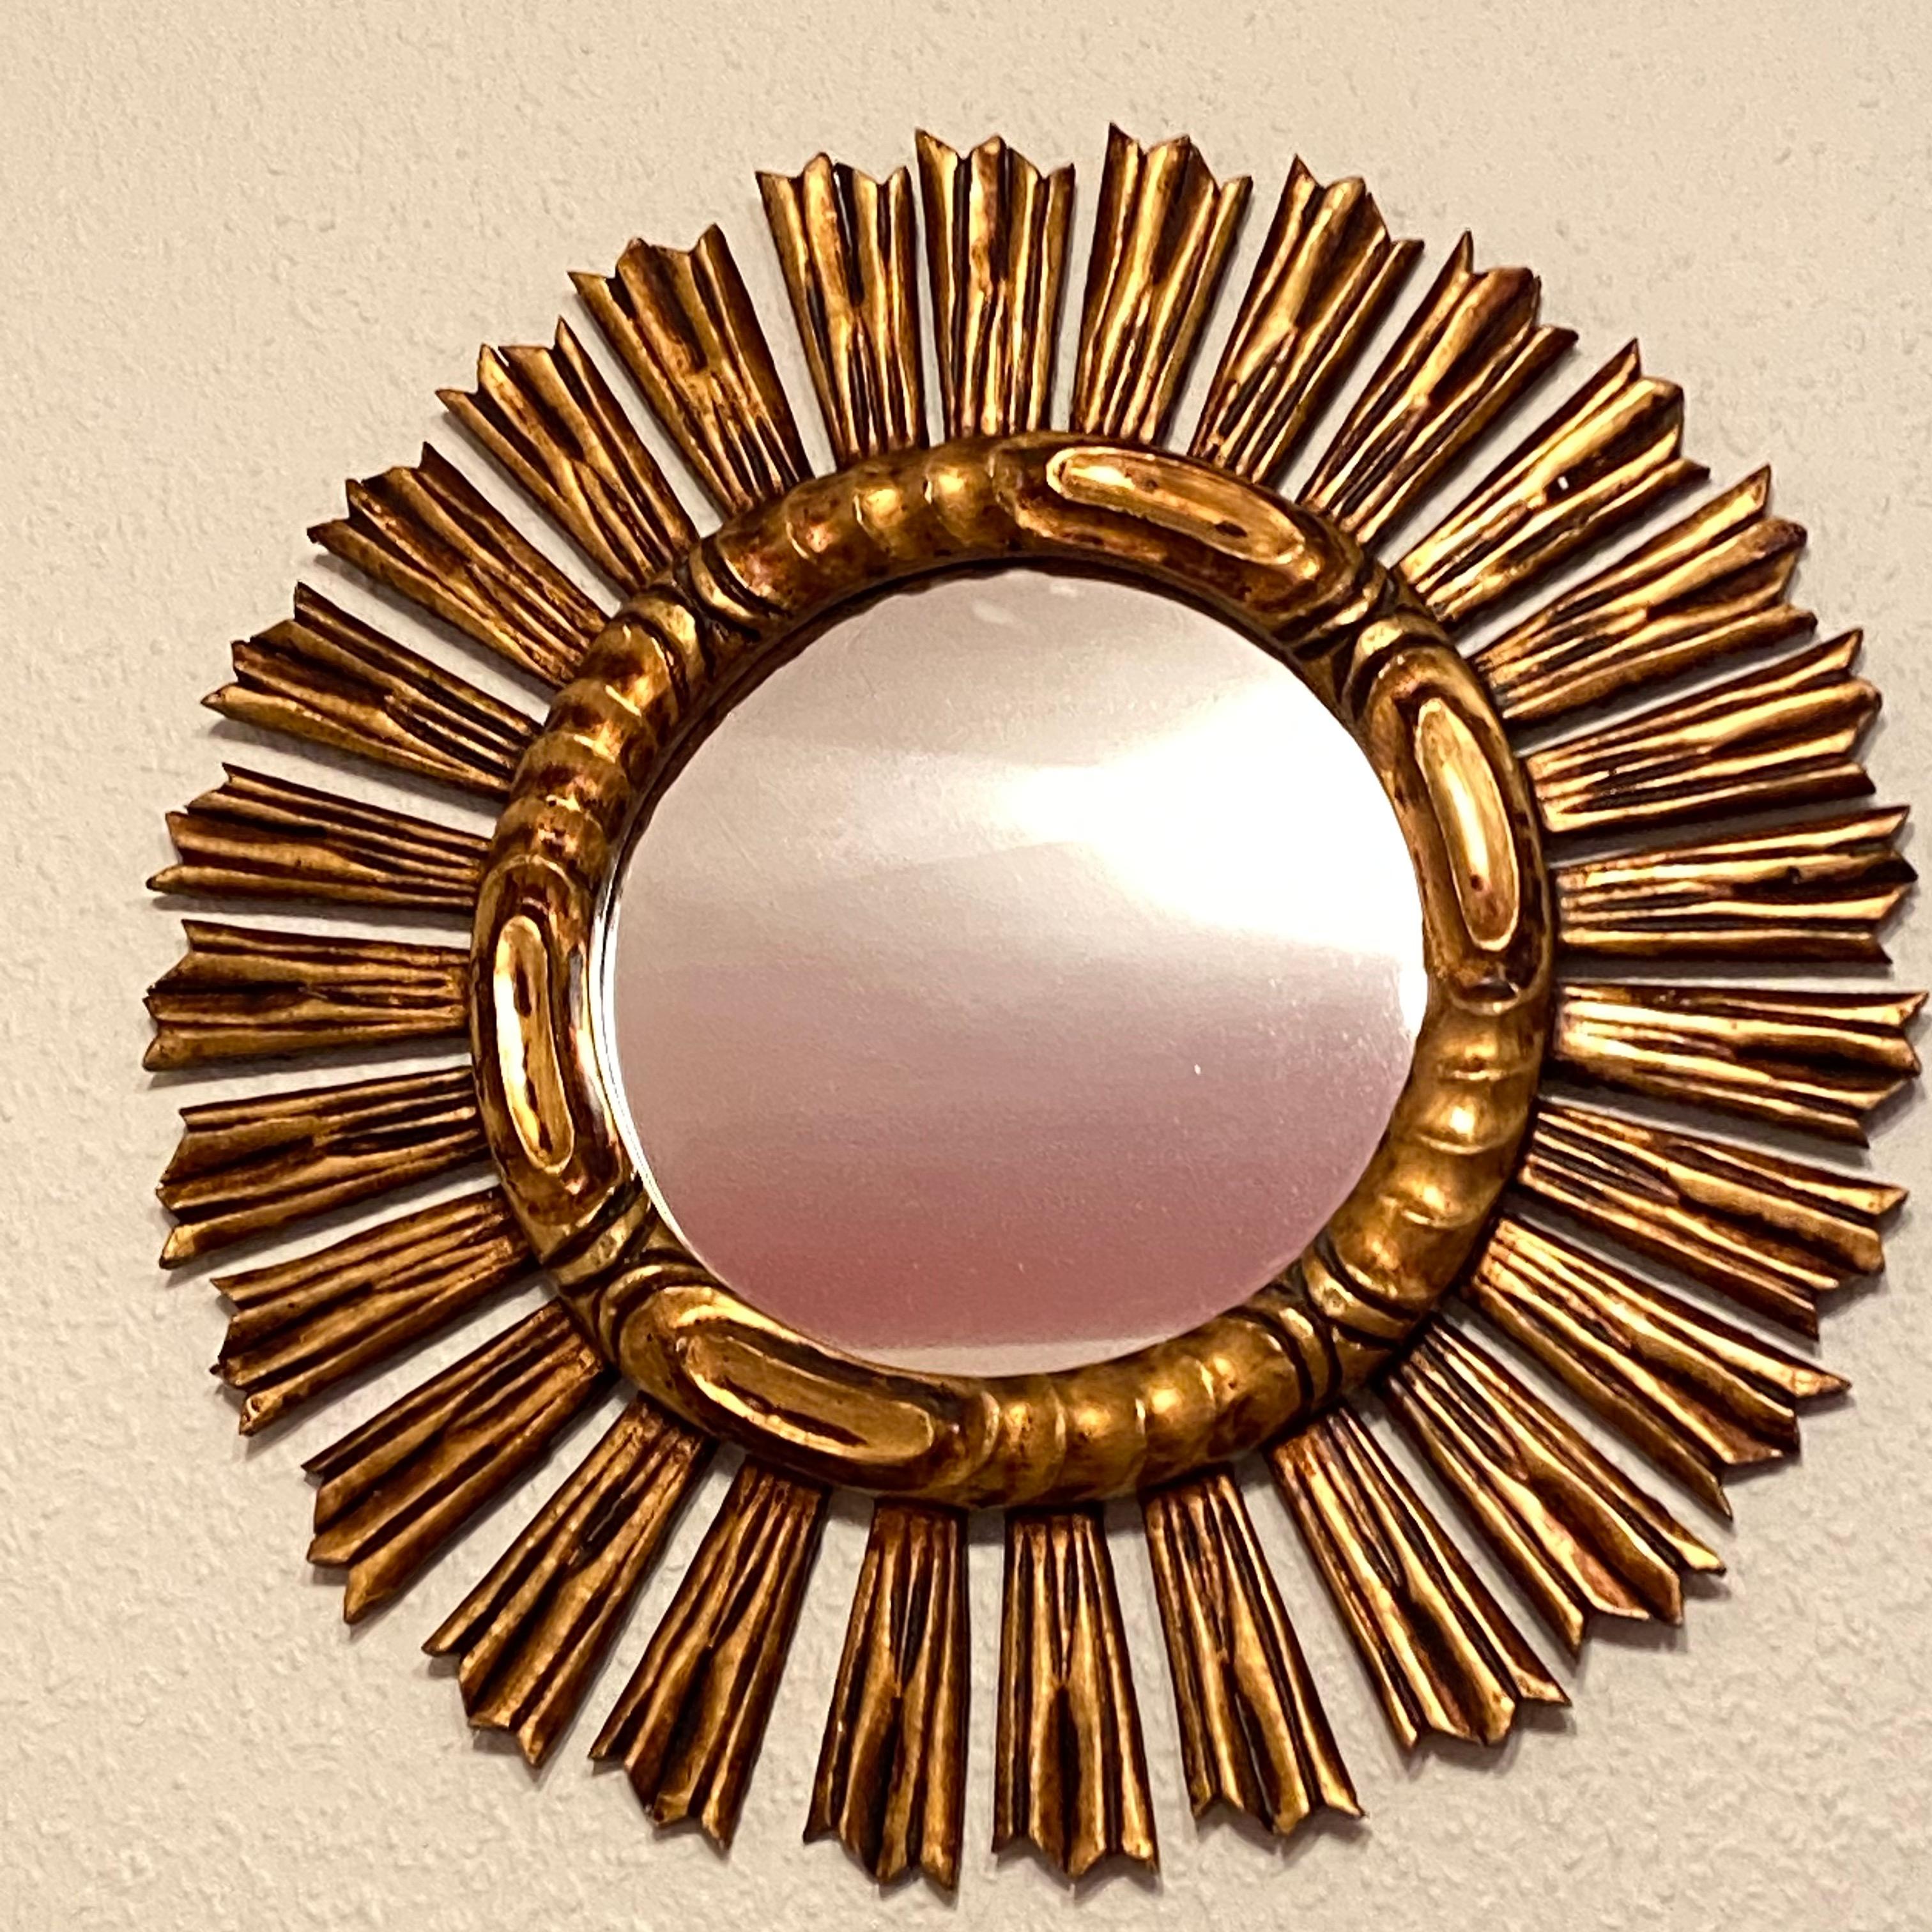 A gorgeous starburst sunburst mirror. Made of gilded wood. It measures approximate: 20